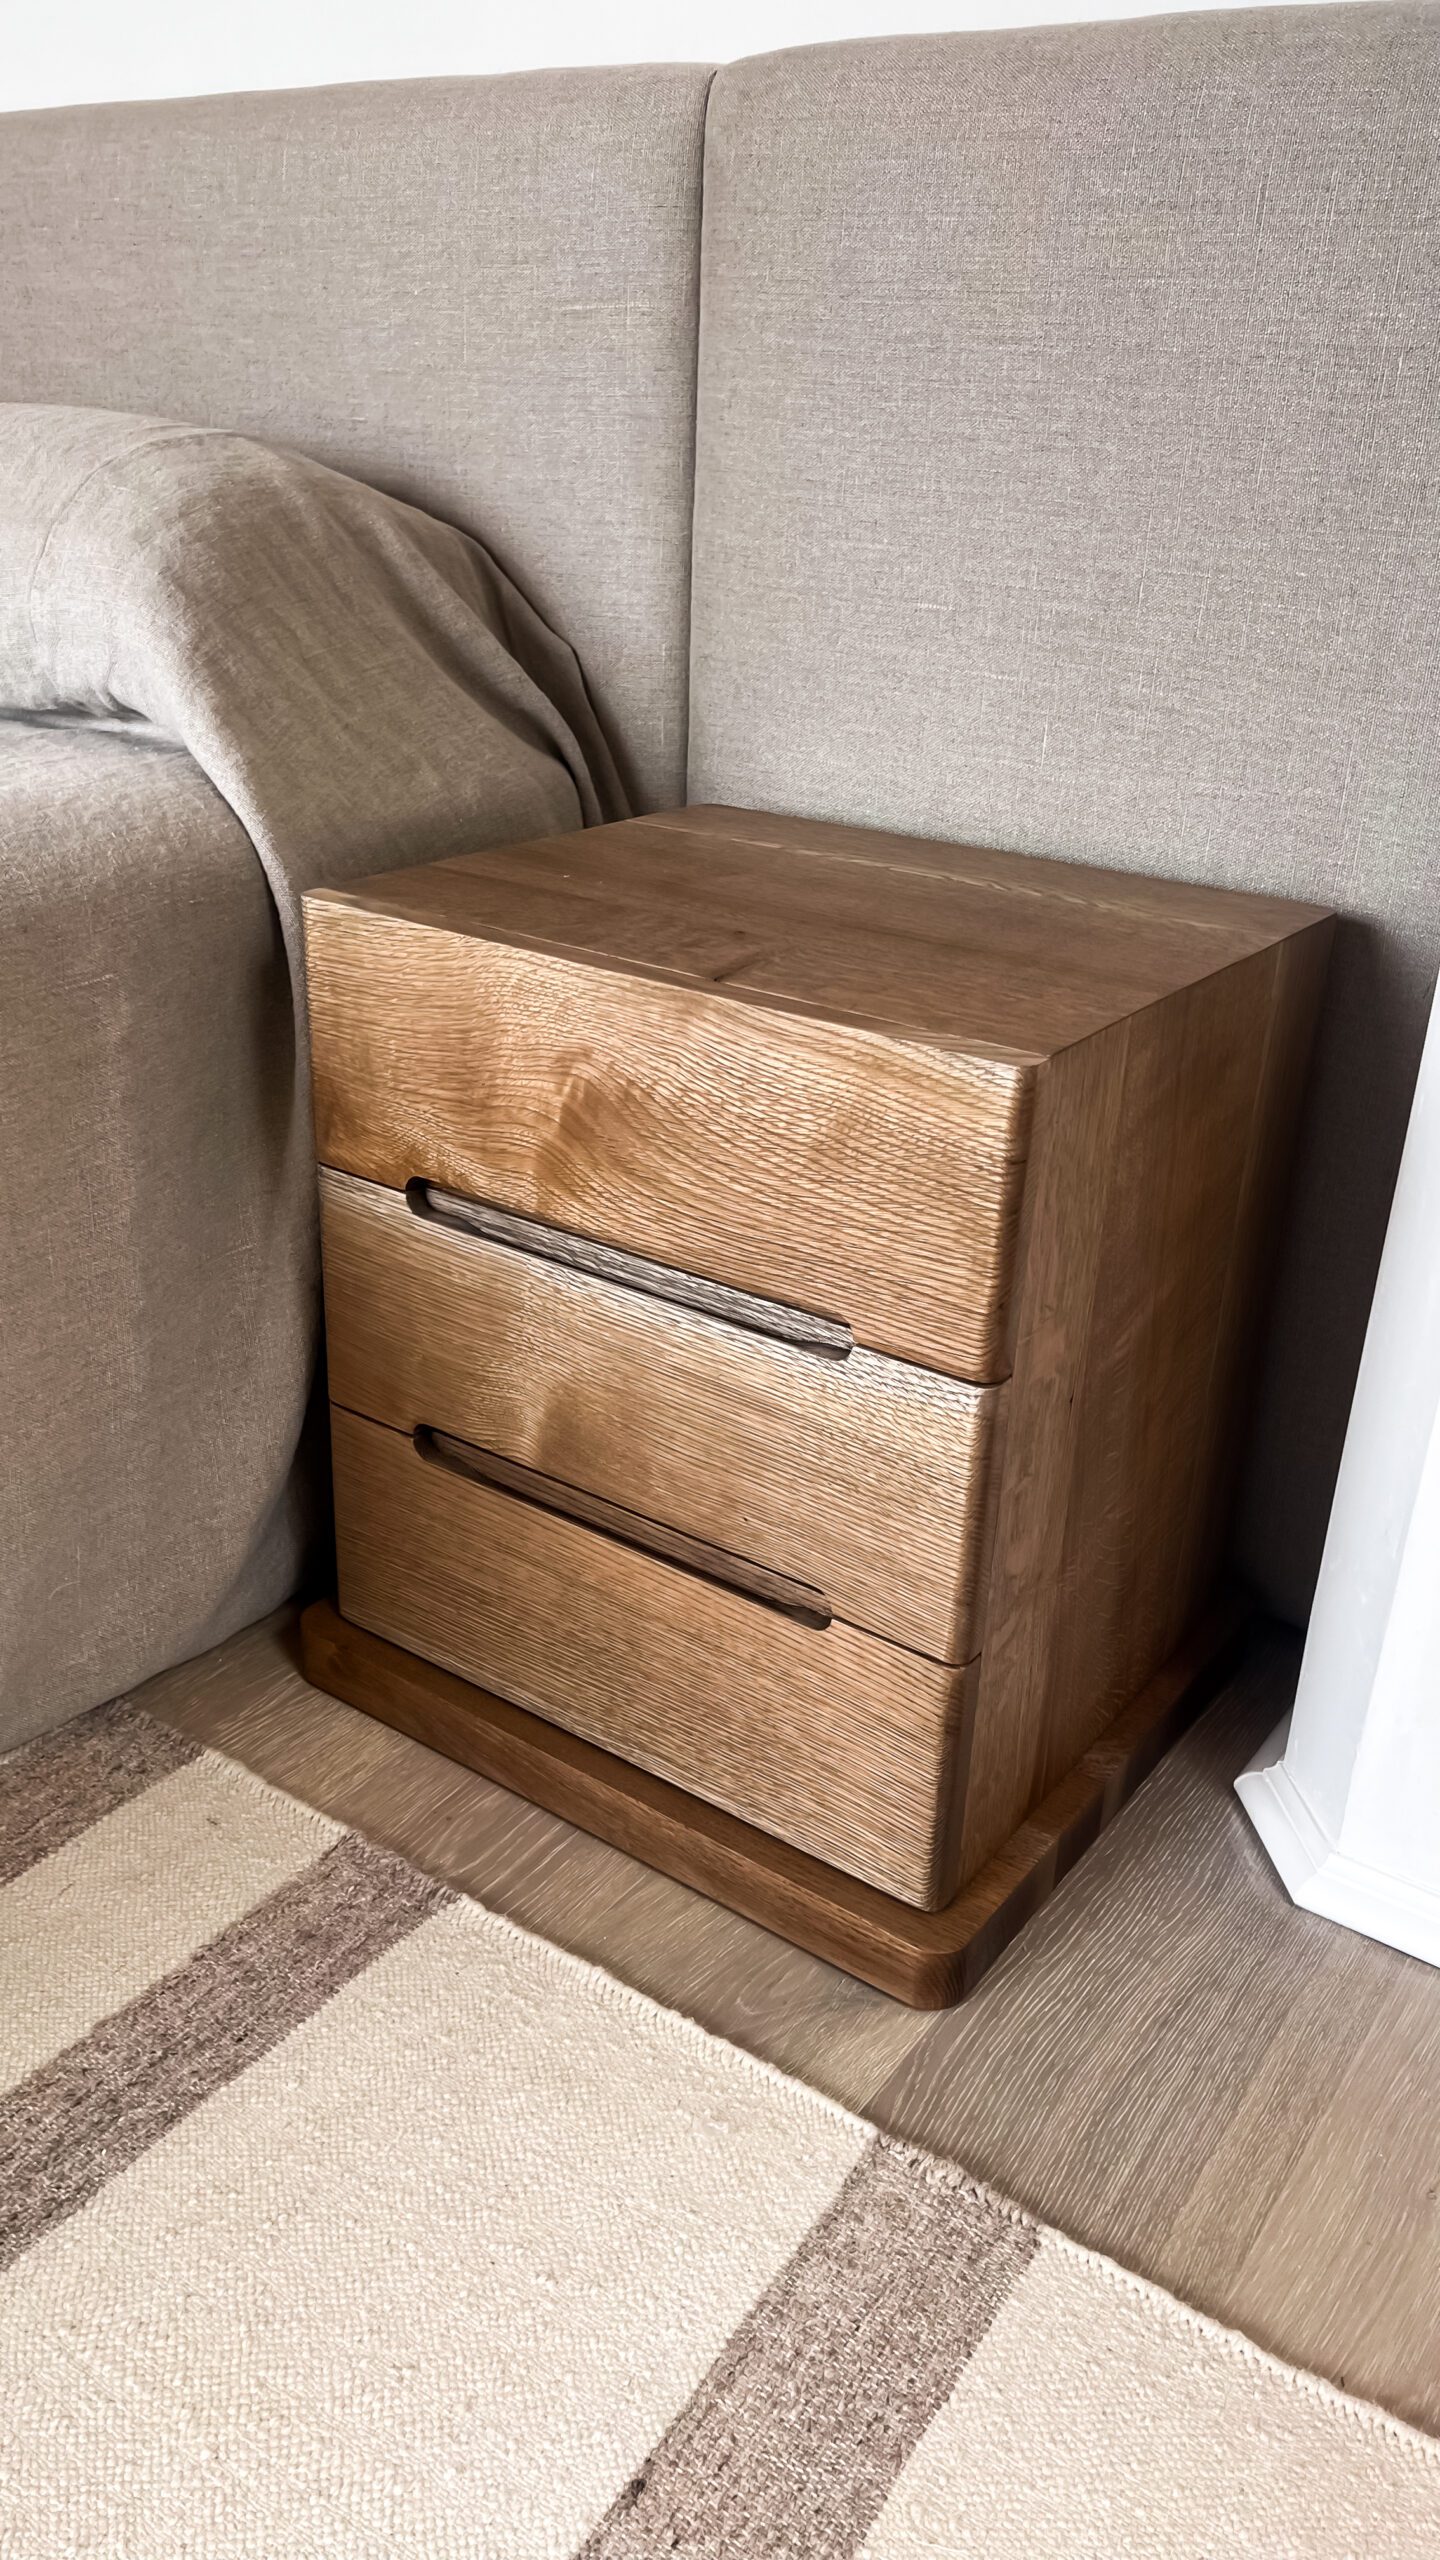 Bedside Table with Integrated Pulls on Drawers